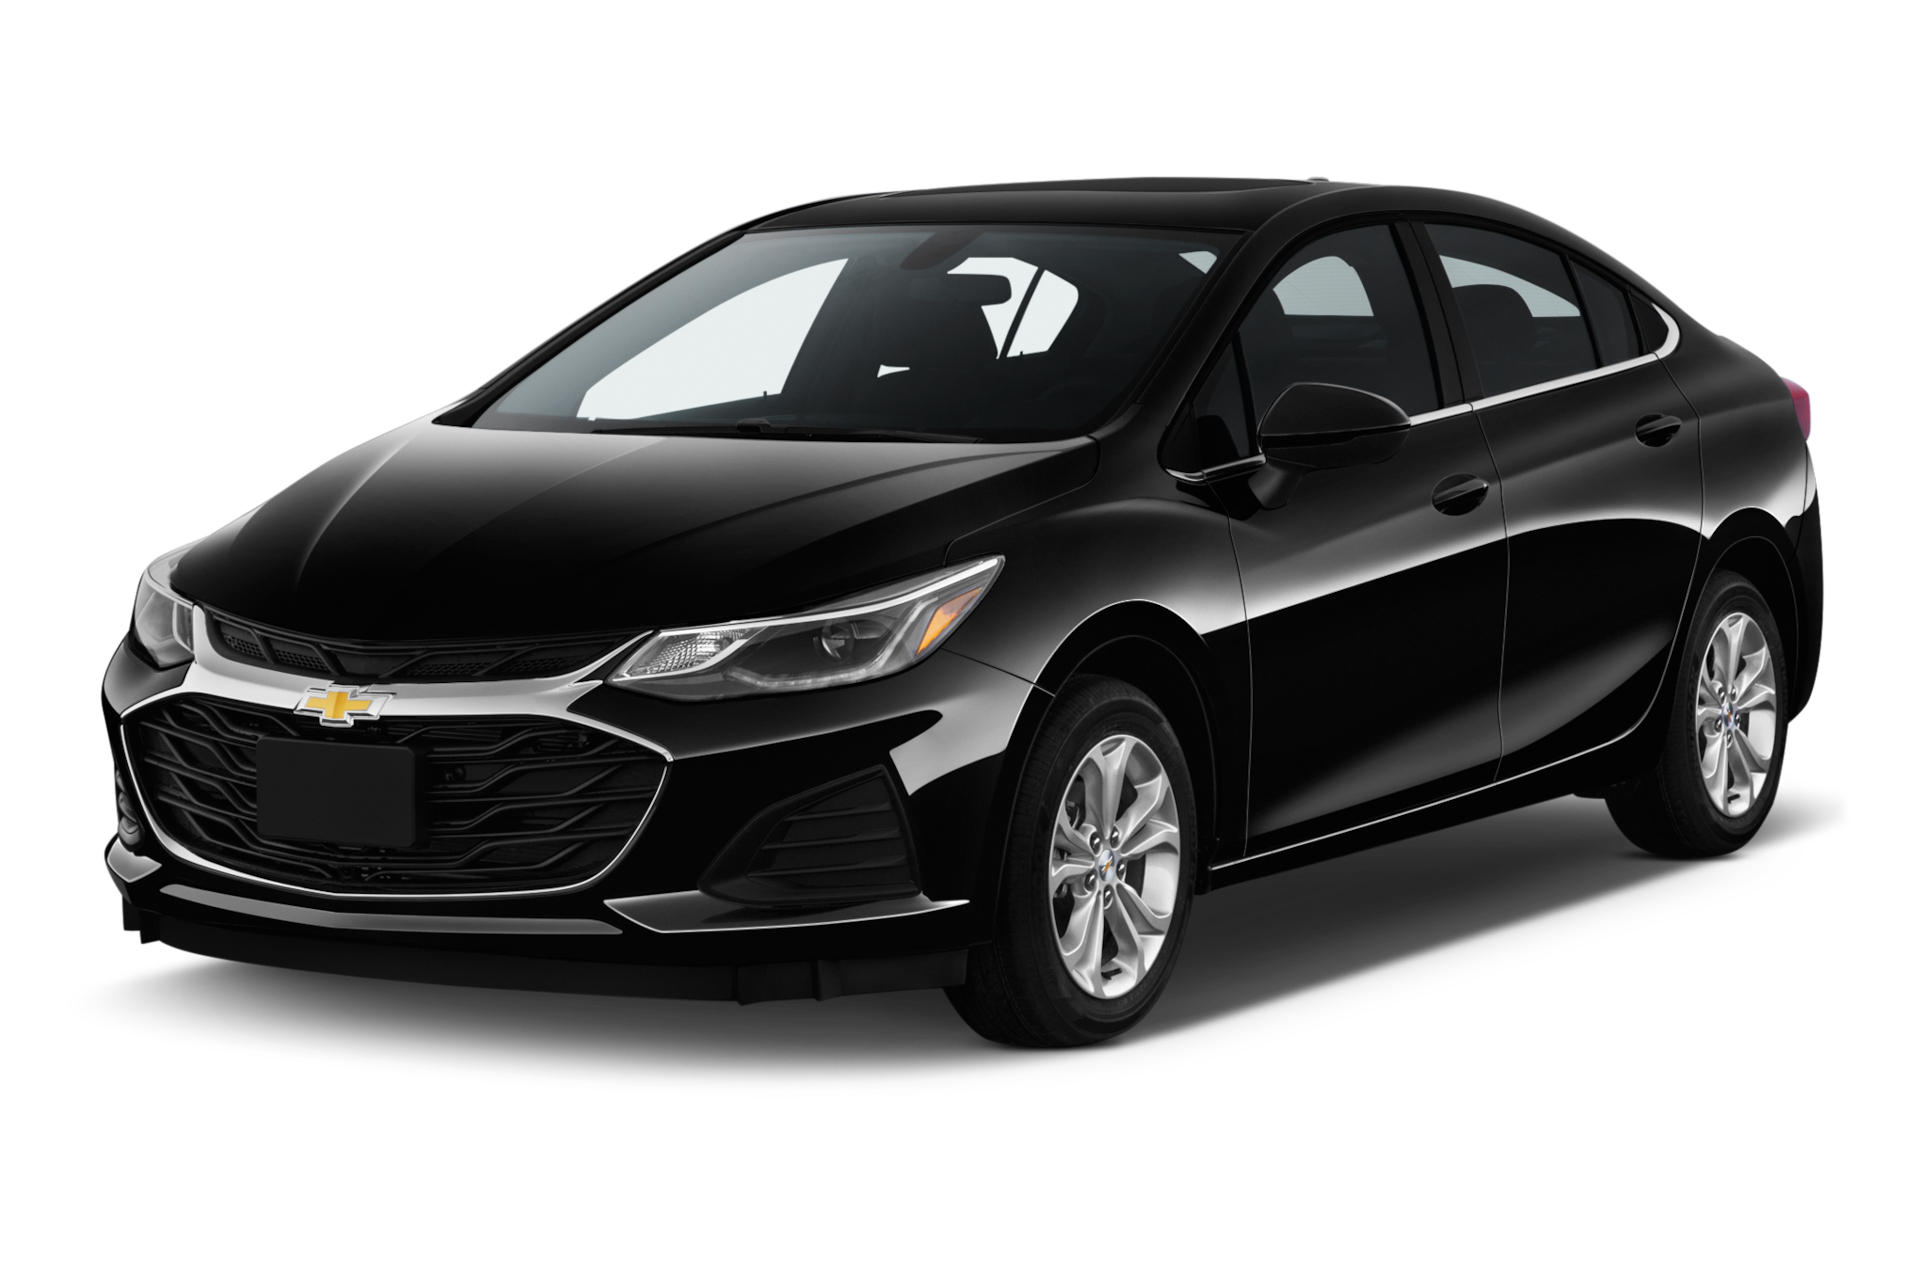 2019 Chevrolet Cruze Prices, Reviews, and Photos - MotorTrend